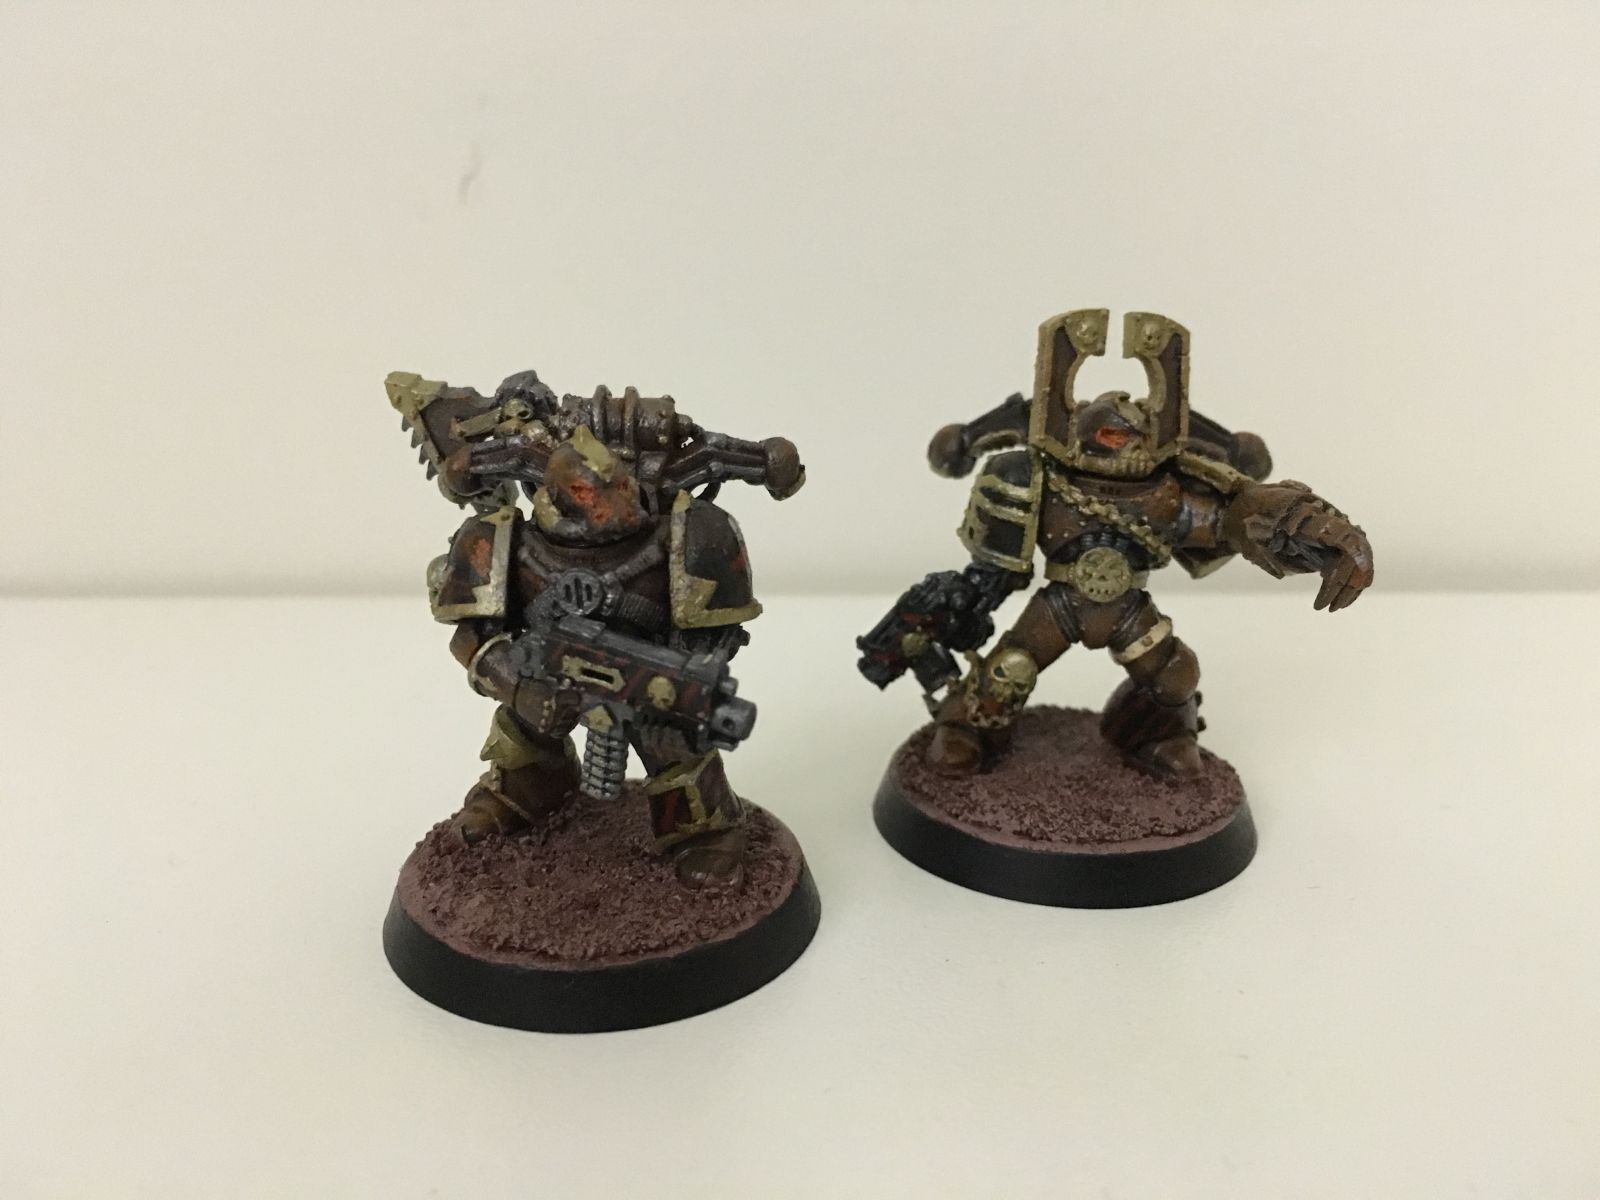 The Rusted Horde - Marine and Sargeant